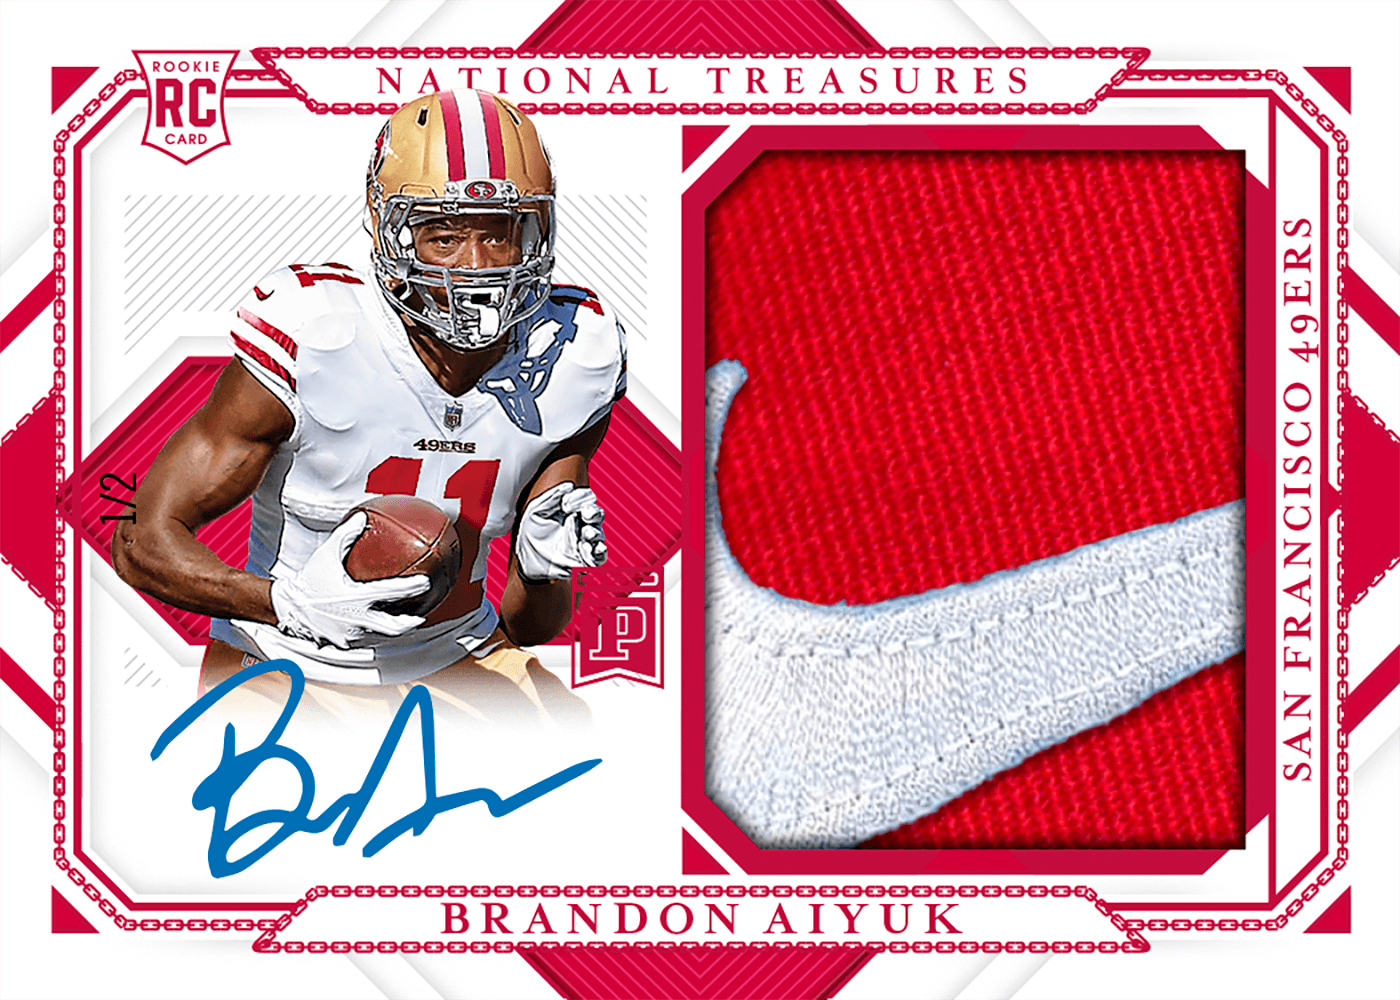 2020 Playoff National Treasures Football - BC Rookie Material